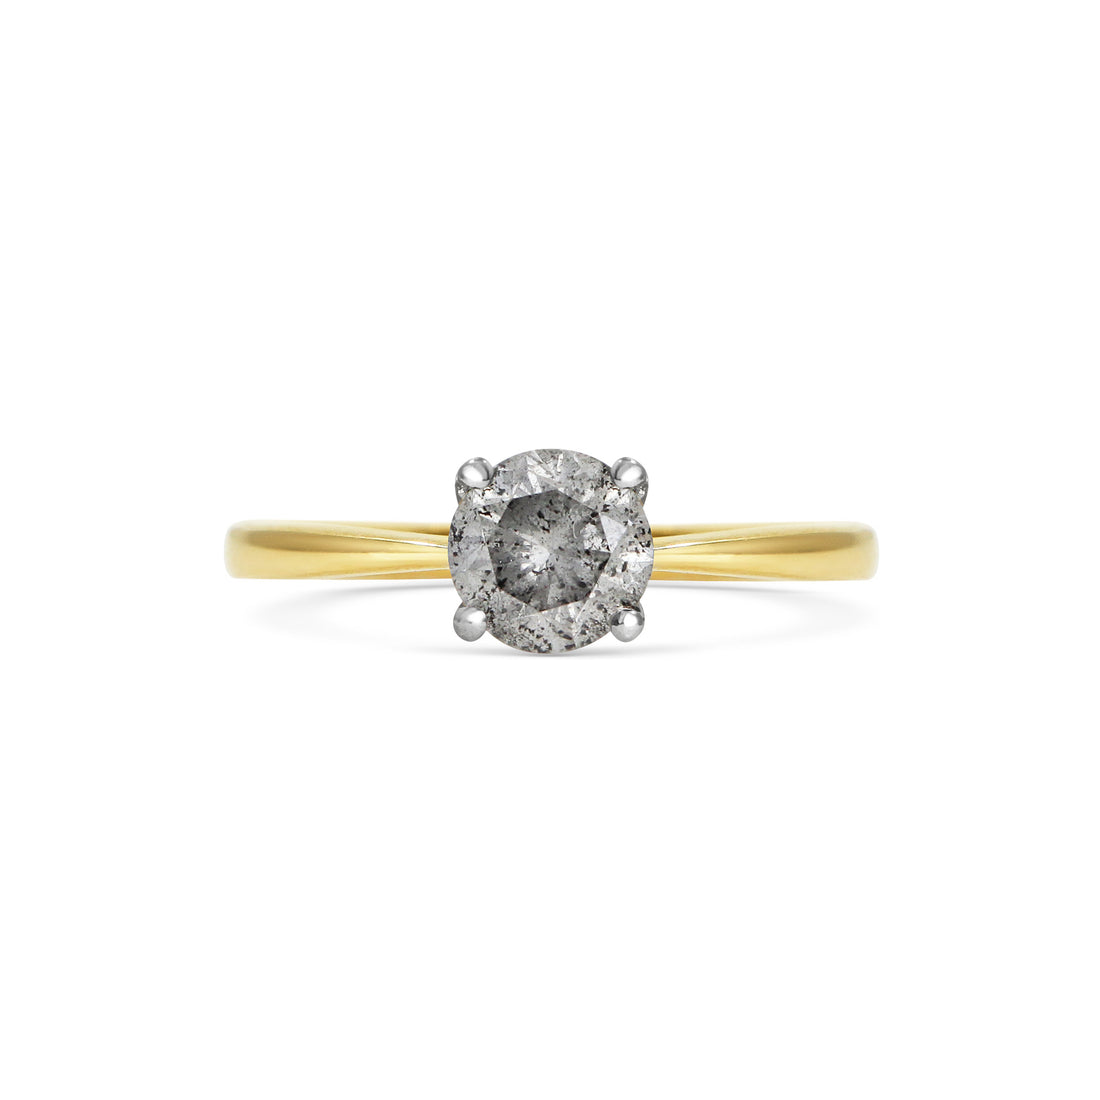  Stormy Grey Diamond Ring by Michelle Oh | The Cut London